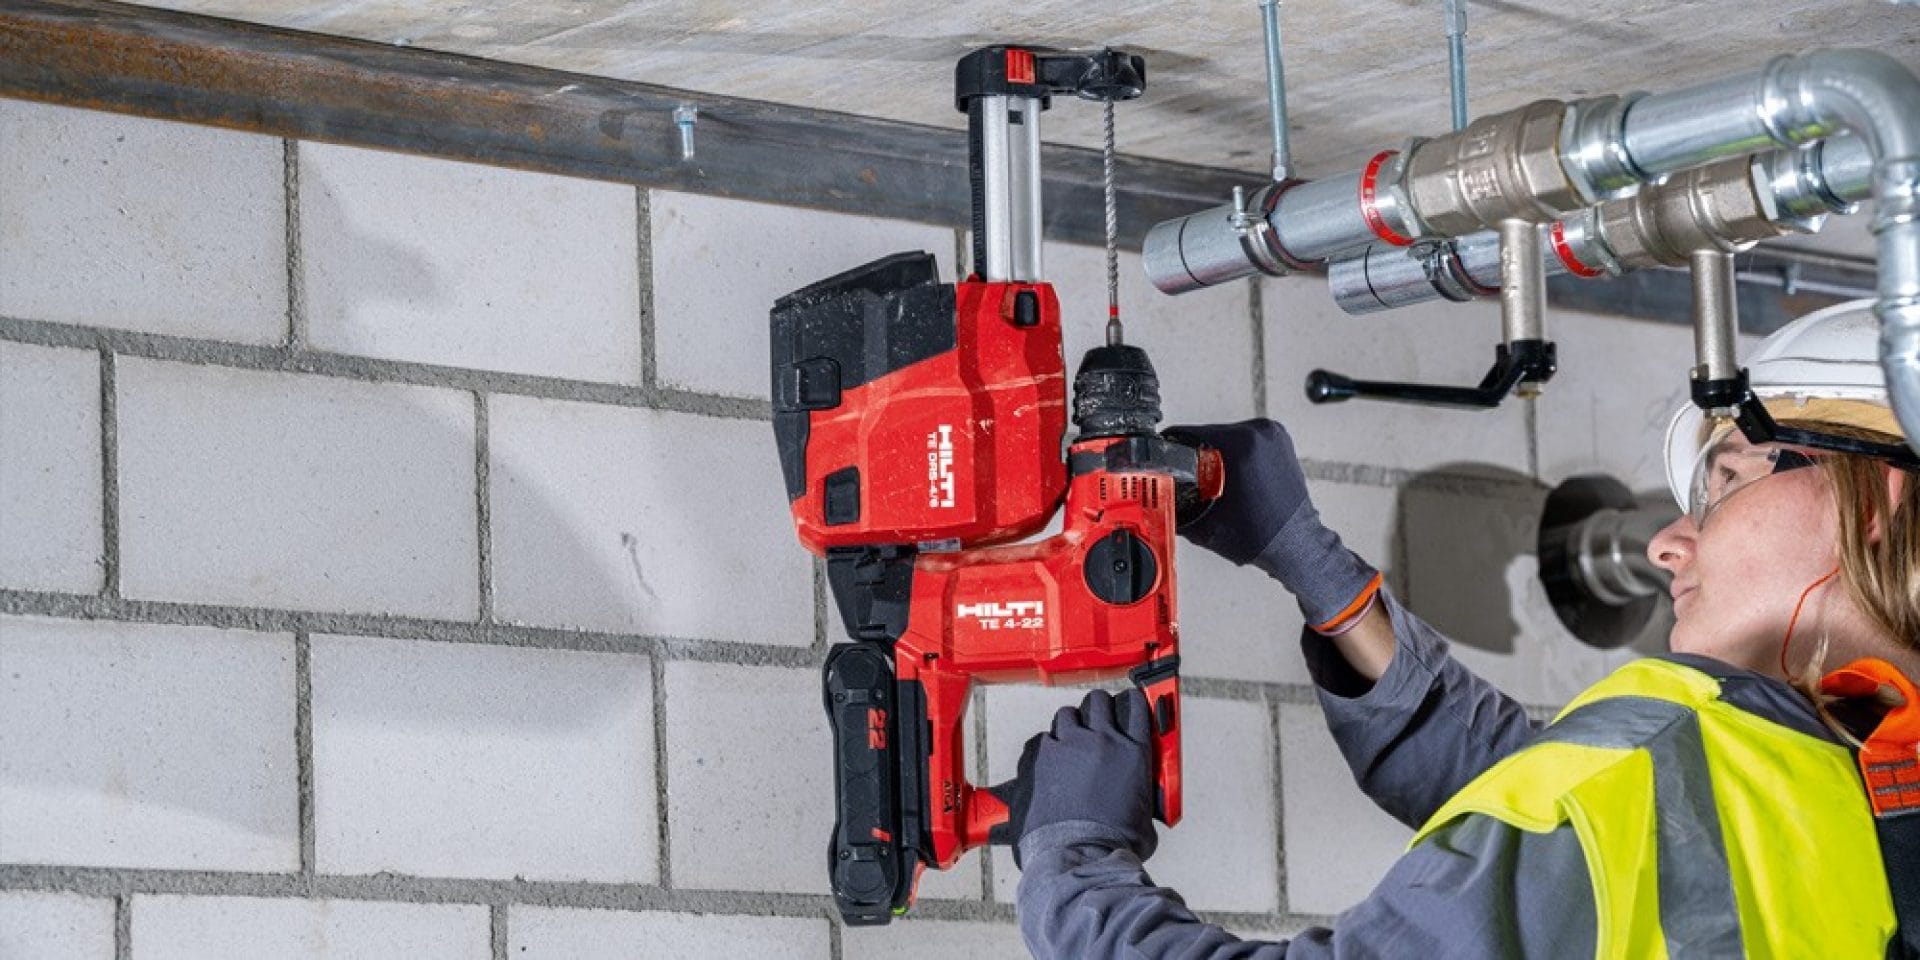 A person is doing overhead work, using the Hilti TE 4-22 cordless rotary hammer